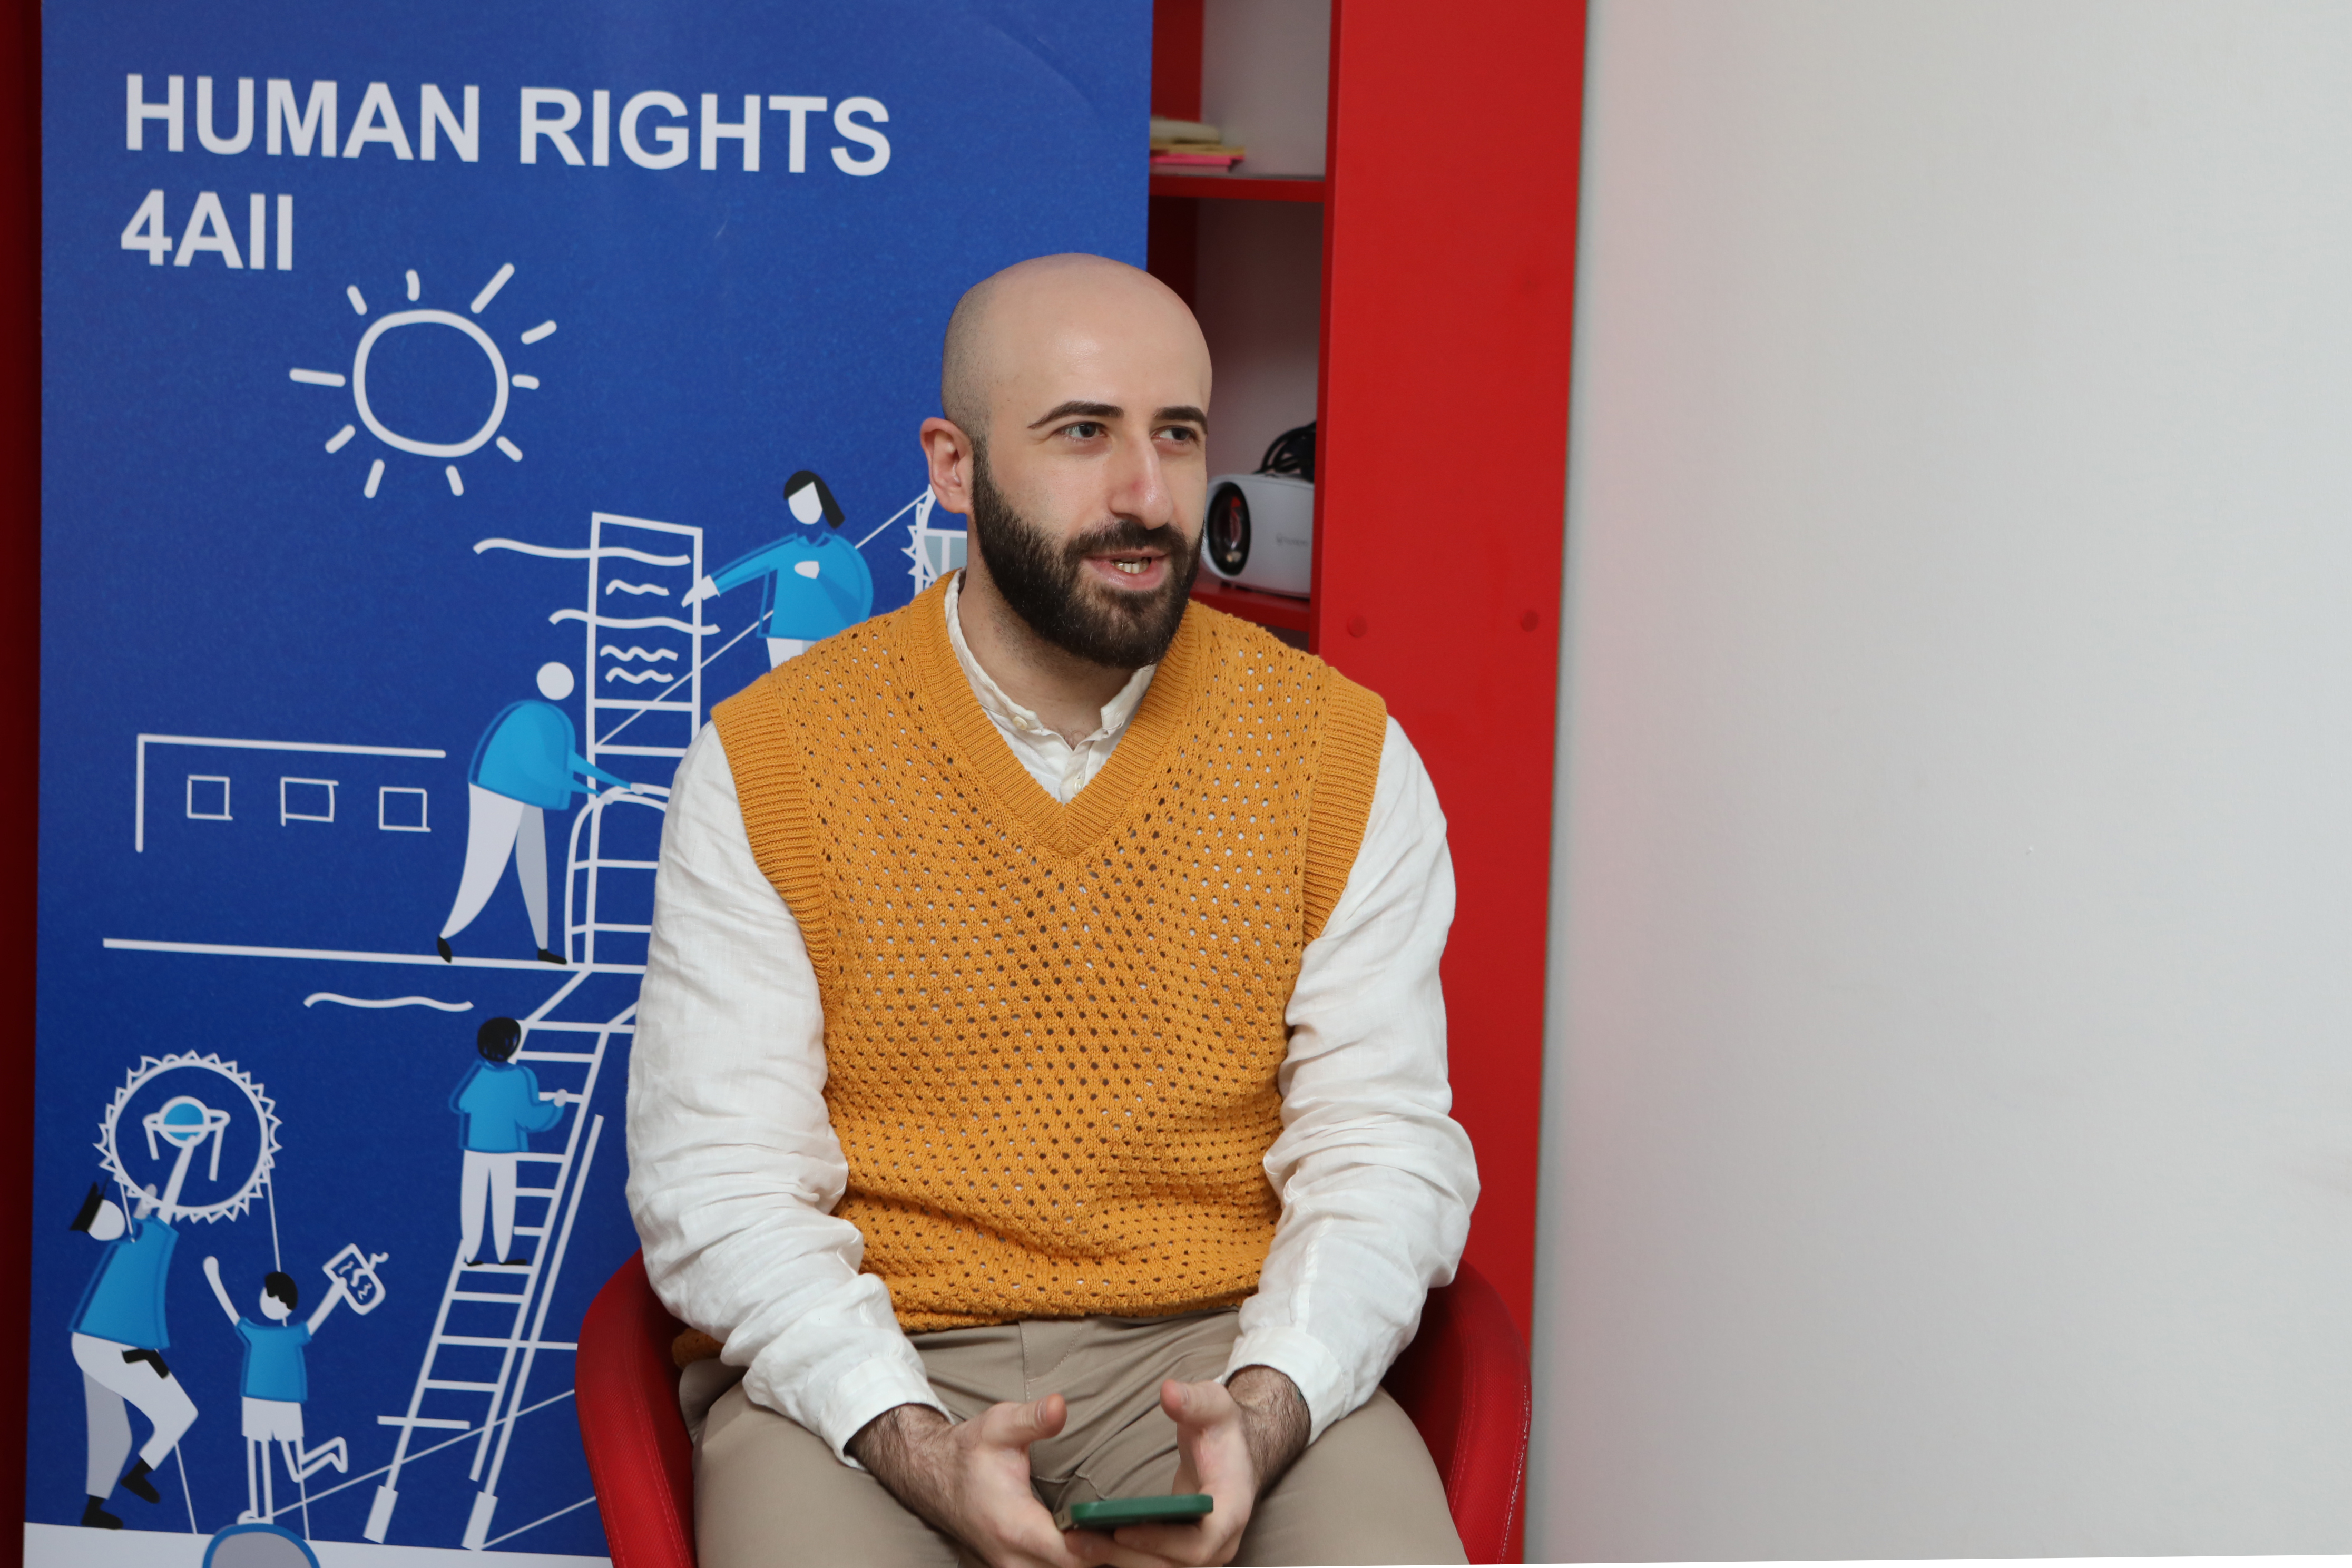 Beka Gabadadze in an orange sweater and white shirt speaking with a blue UNDP banner behind him that reads "Human Rights 4 All"